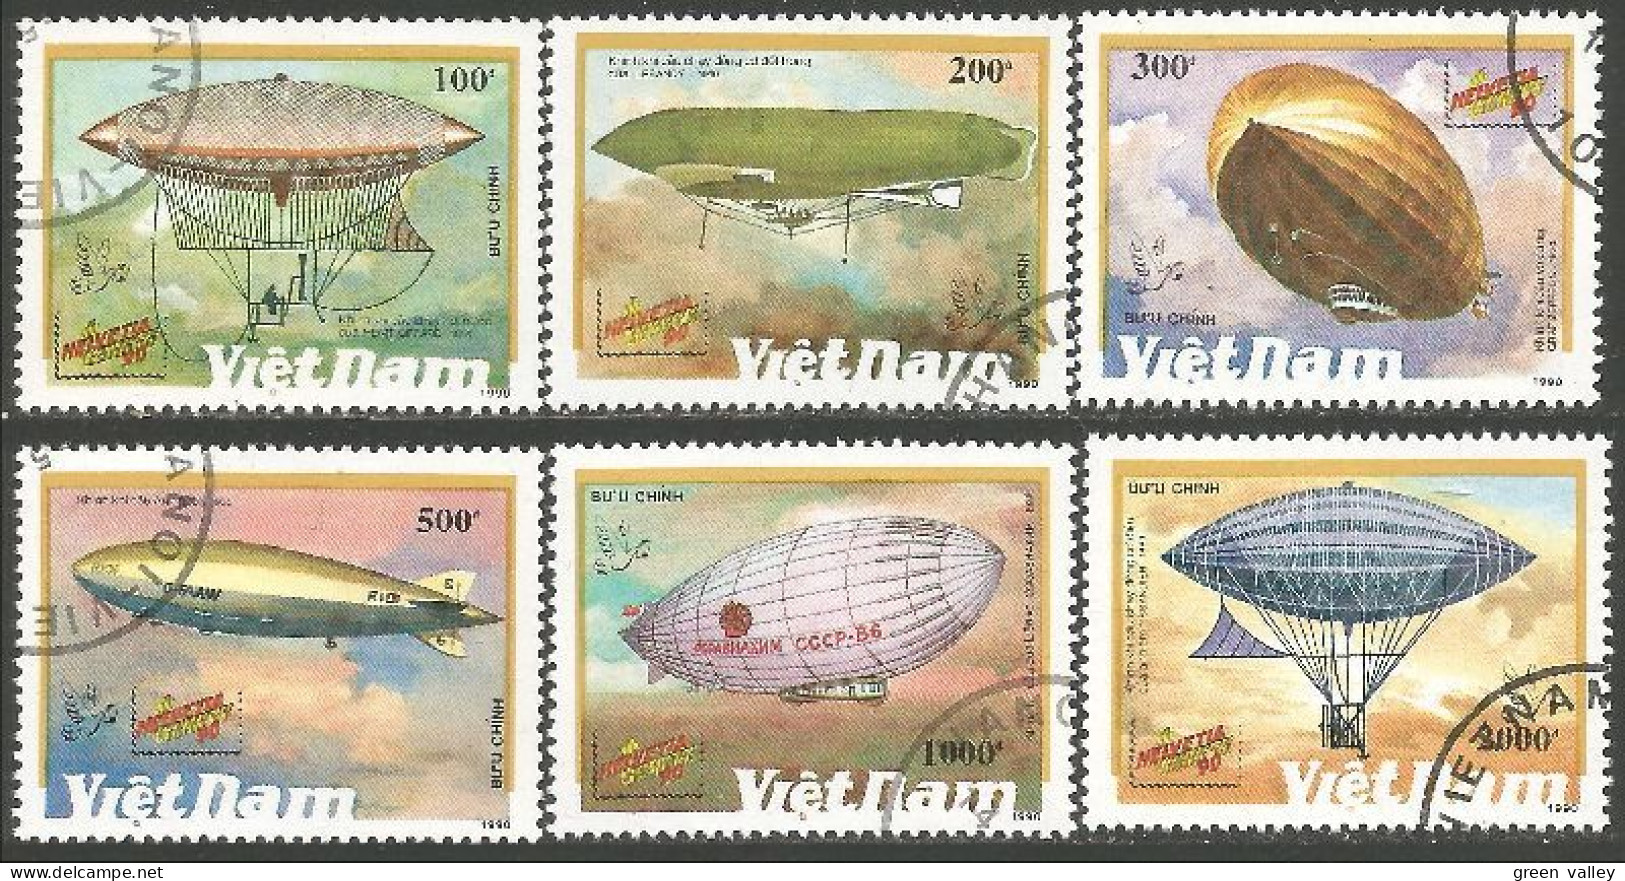 BL-15b Sao Tome Zeppelins - Airships